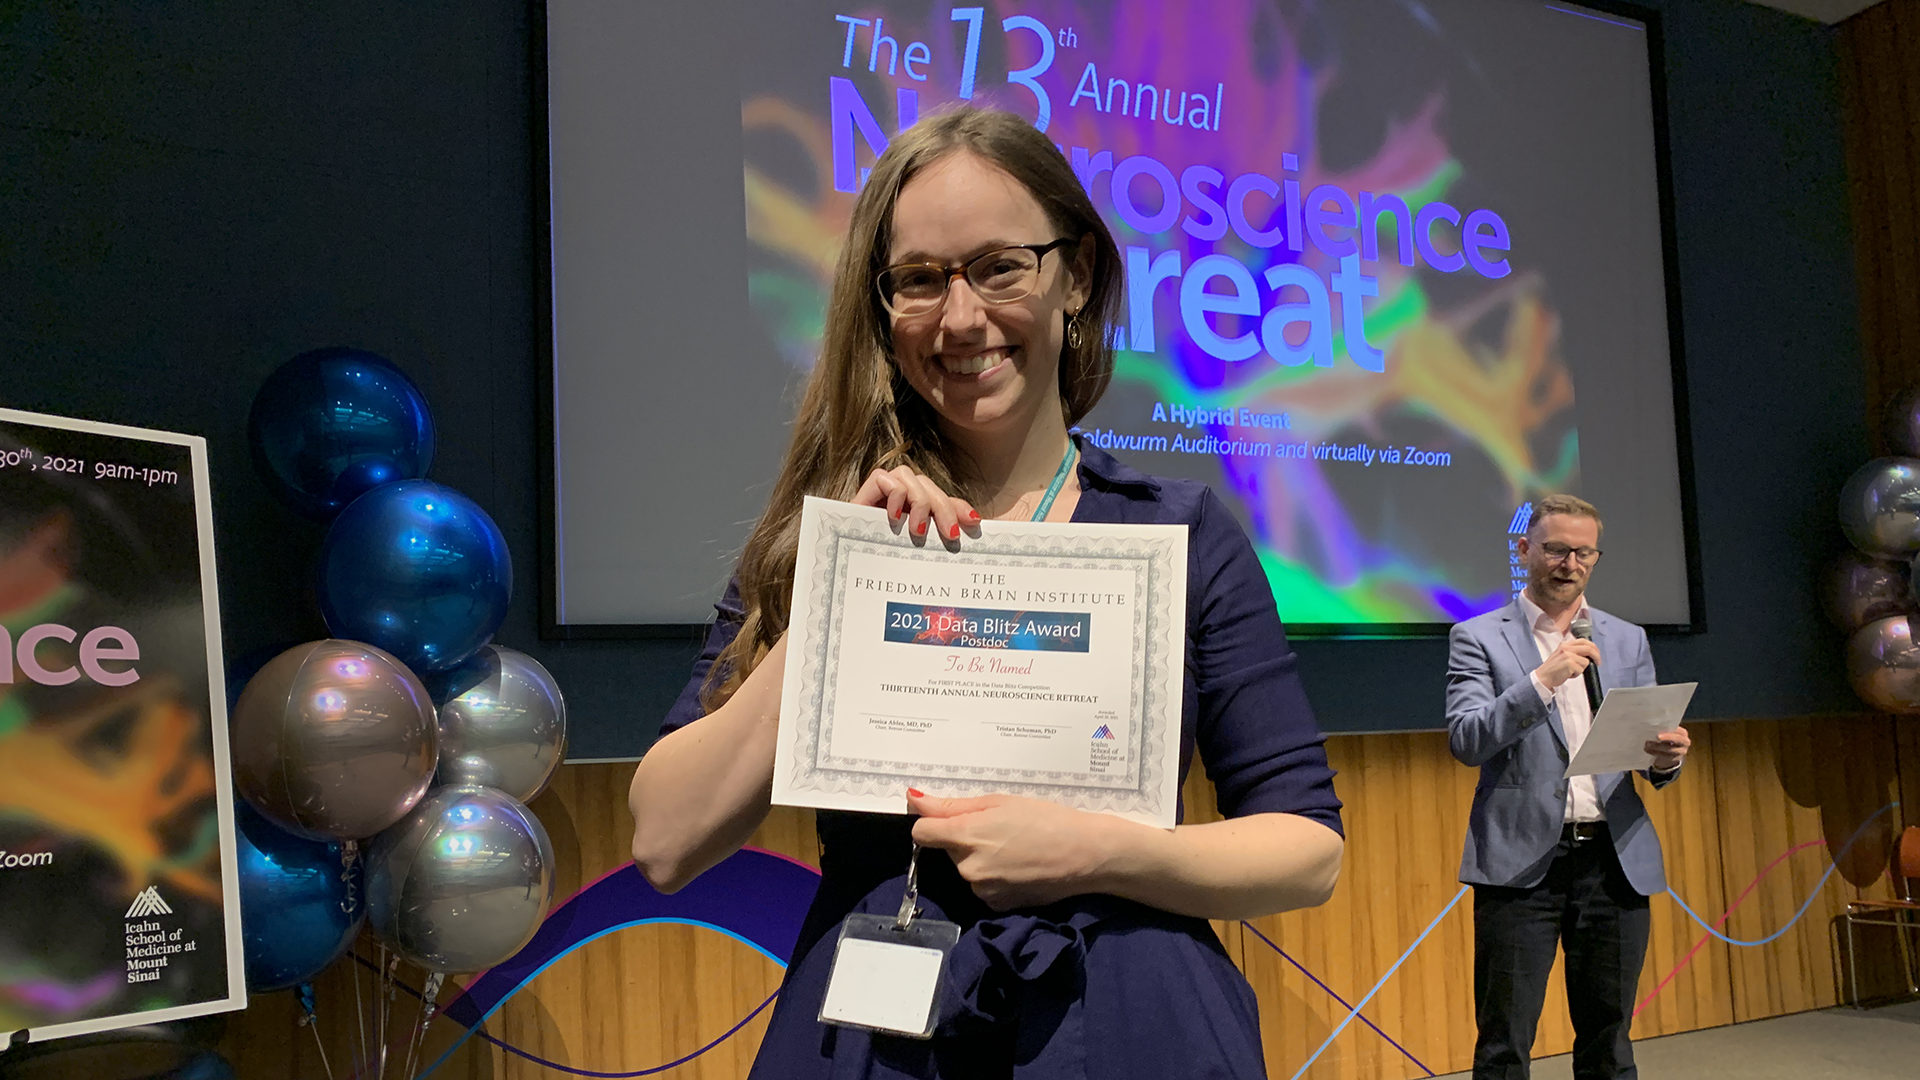 Postdoctoral fellow Jacqueline-Marie Ferland, PhD, was recognized for her research into the effects of THC by Paul Kenny, PhD, Chair of the Nash Family Department of Neuroscience.





